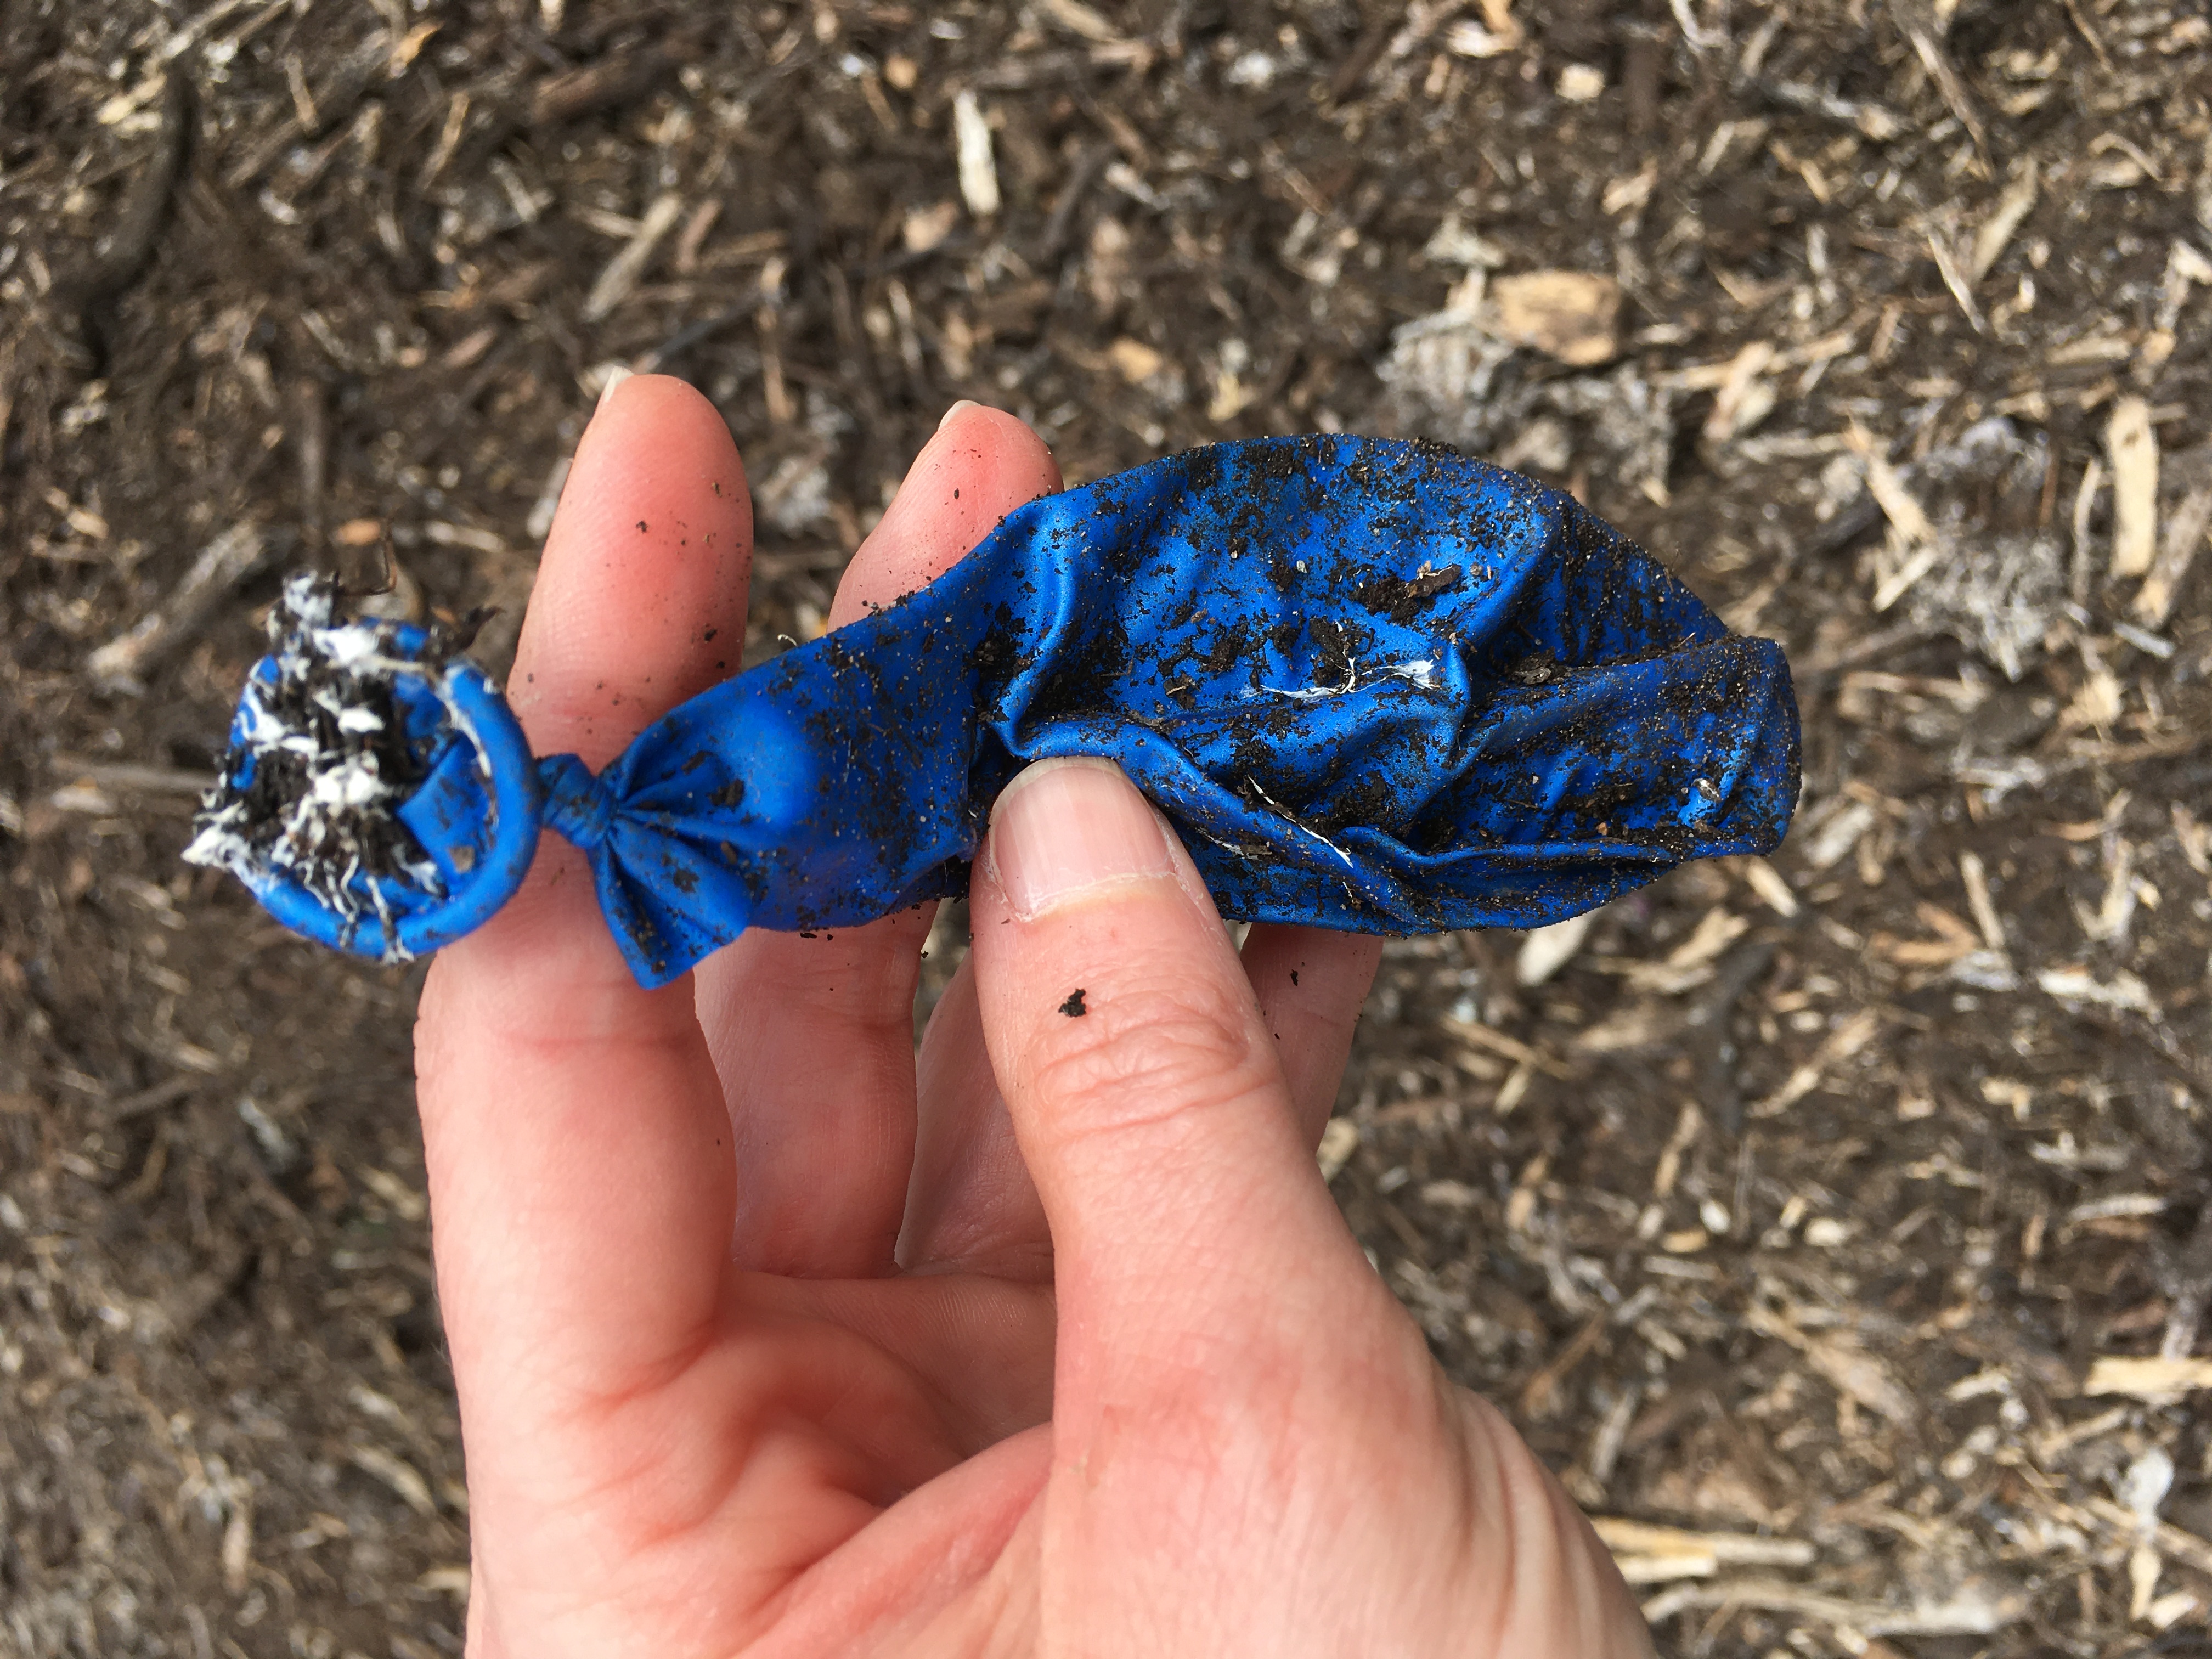 Not much change – a balloon marketed as ‘biodegradable’ after scientists tested it for 3.5 months in industrial compost. Source: Morgan Gilmour